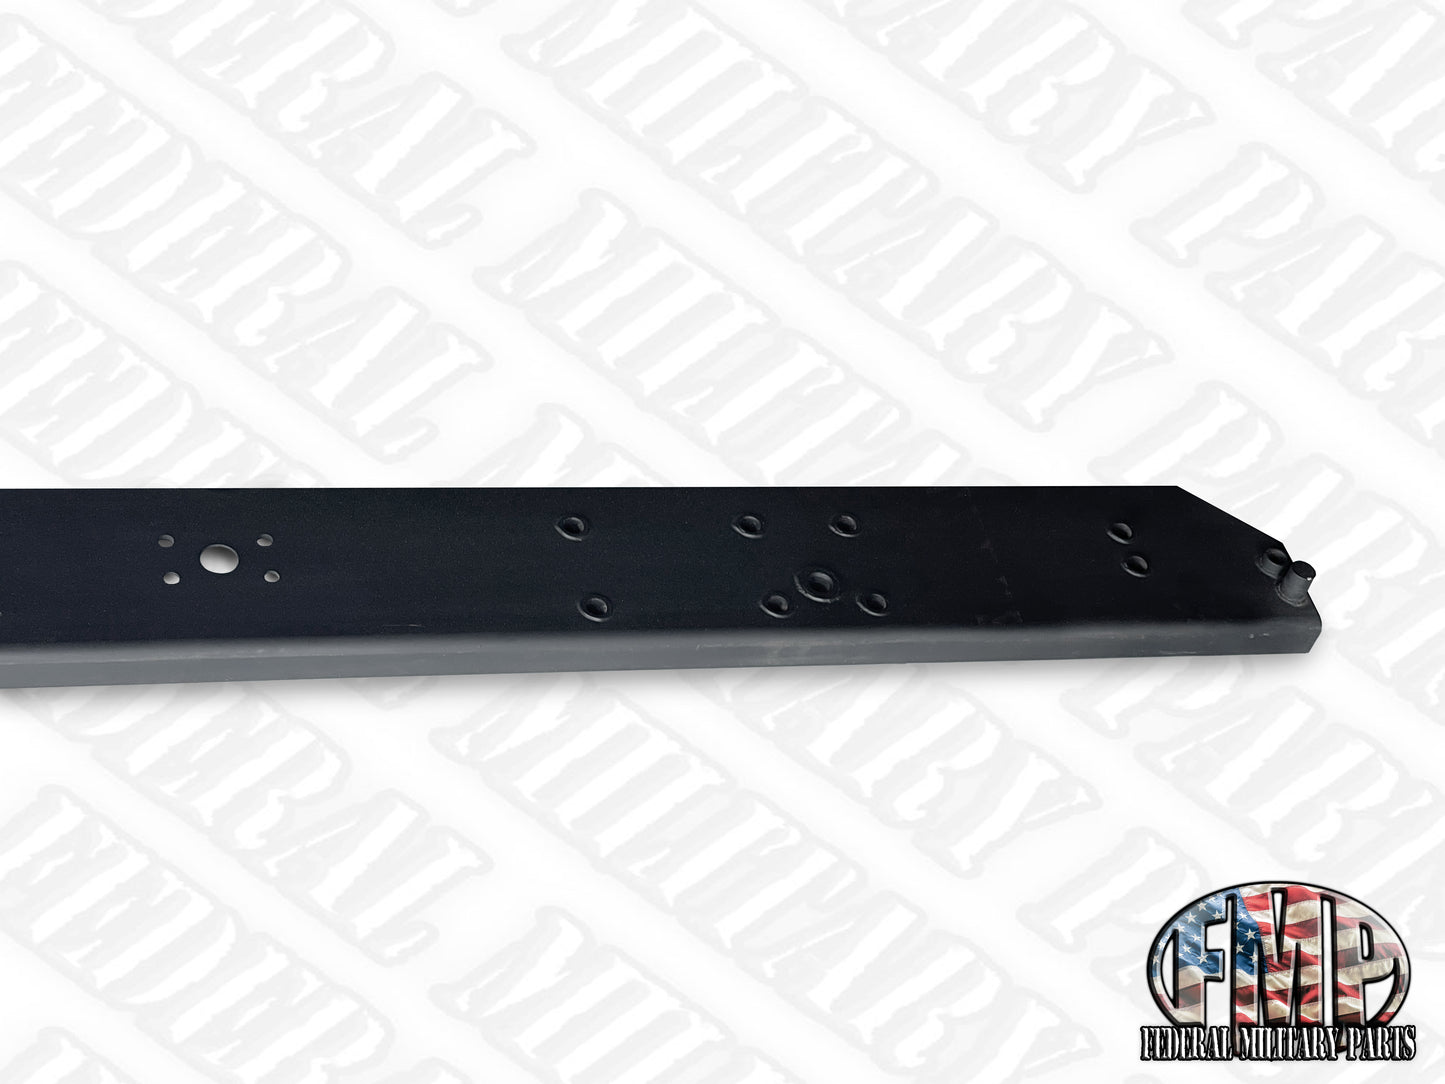 Rear Bumper Only for the HUMVEE / M998 / M1038 / M1097 / M1043A2 / M1045A2